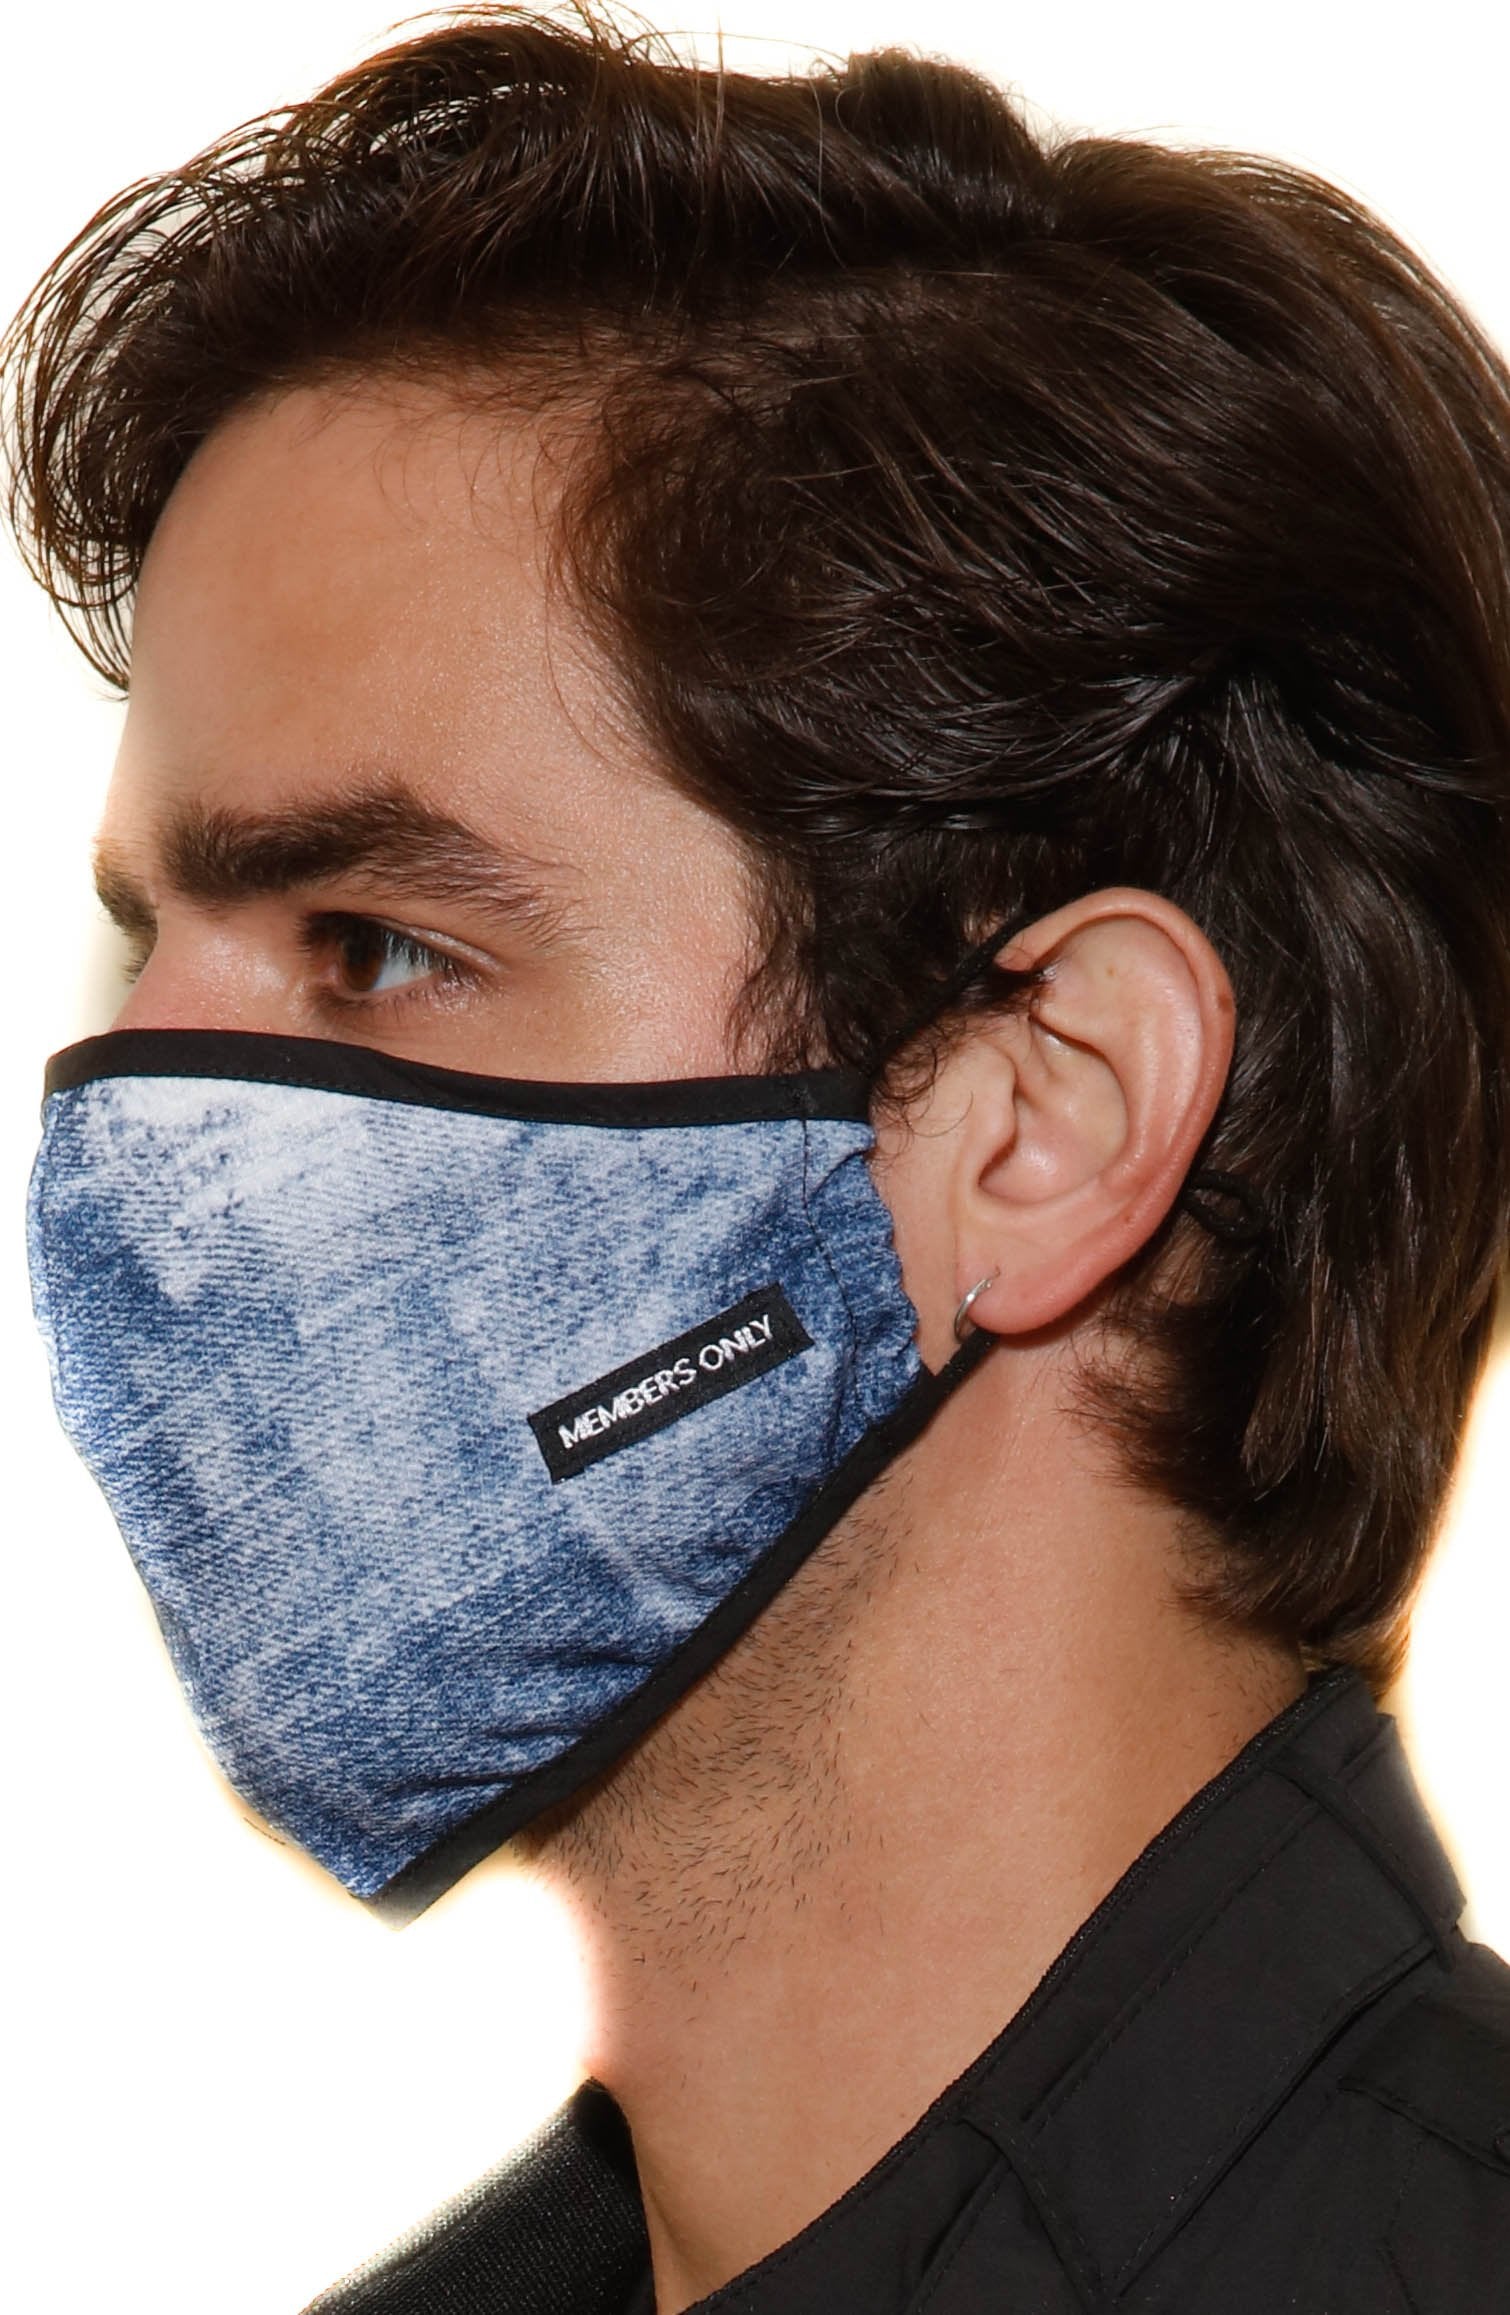 Members Only Cloth Face Masks 3 Pack - INDIGO masks Members Only® Official 